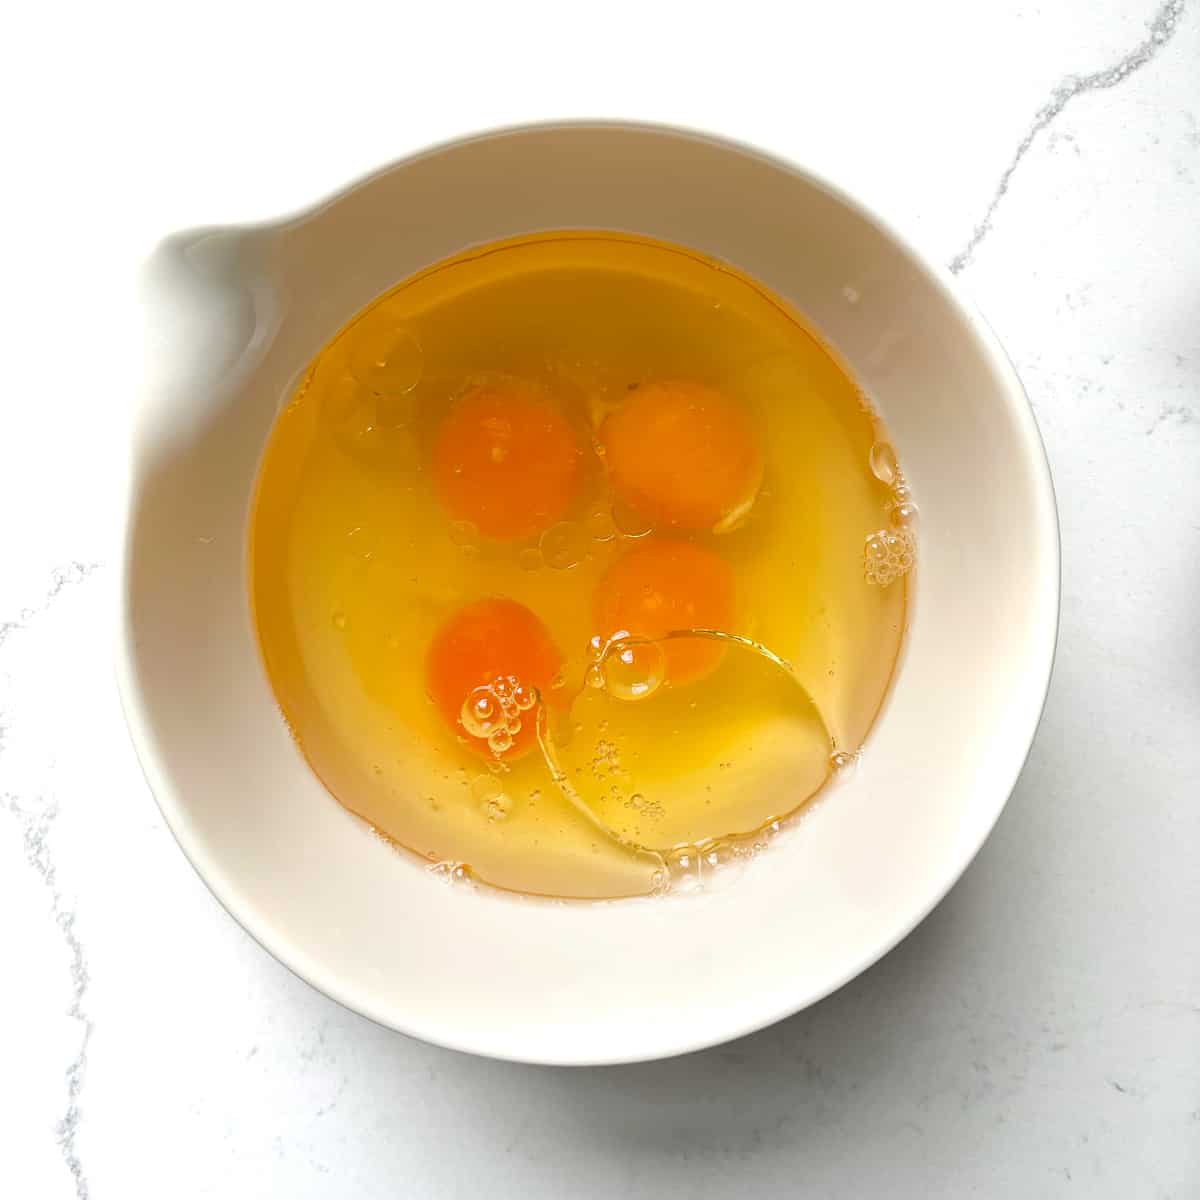 Eggs and oil added to a white bowl.